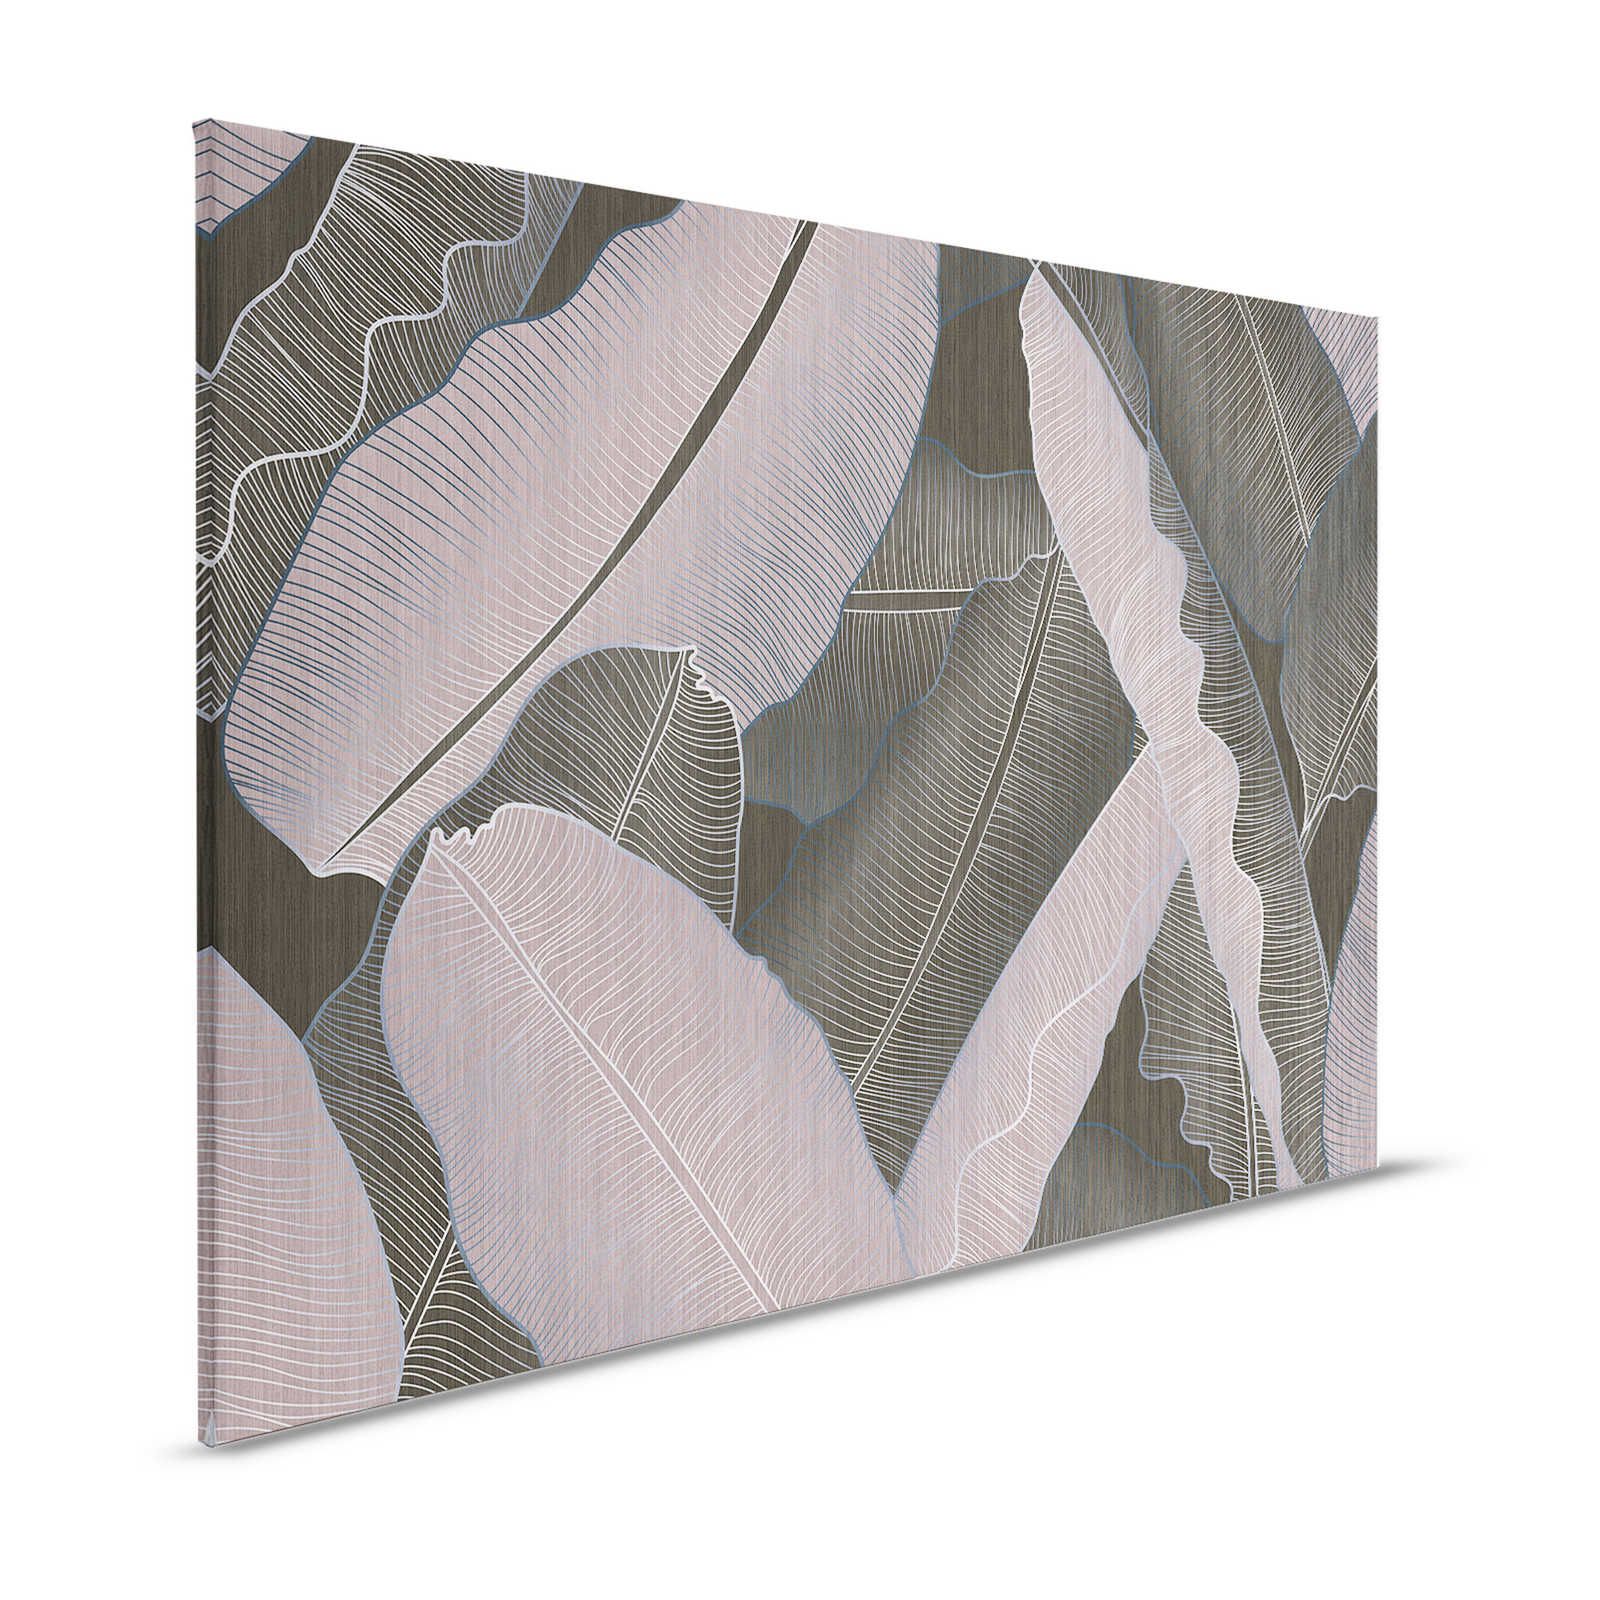 Under Cover 2 - Palm Leaf Canvas Painting Grey & Pink Drawing Style - 1.20 m x 0.80 m
